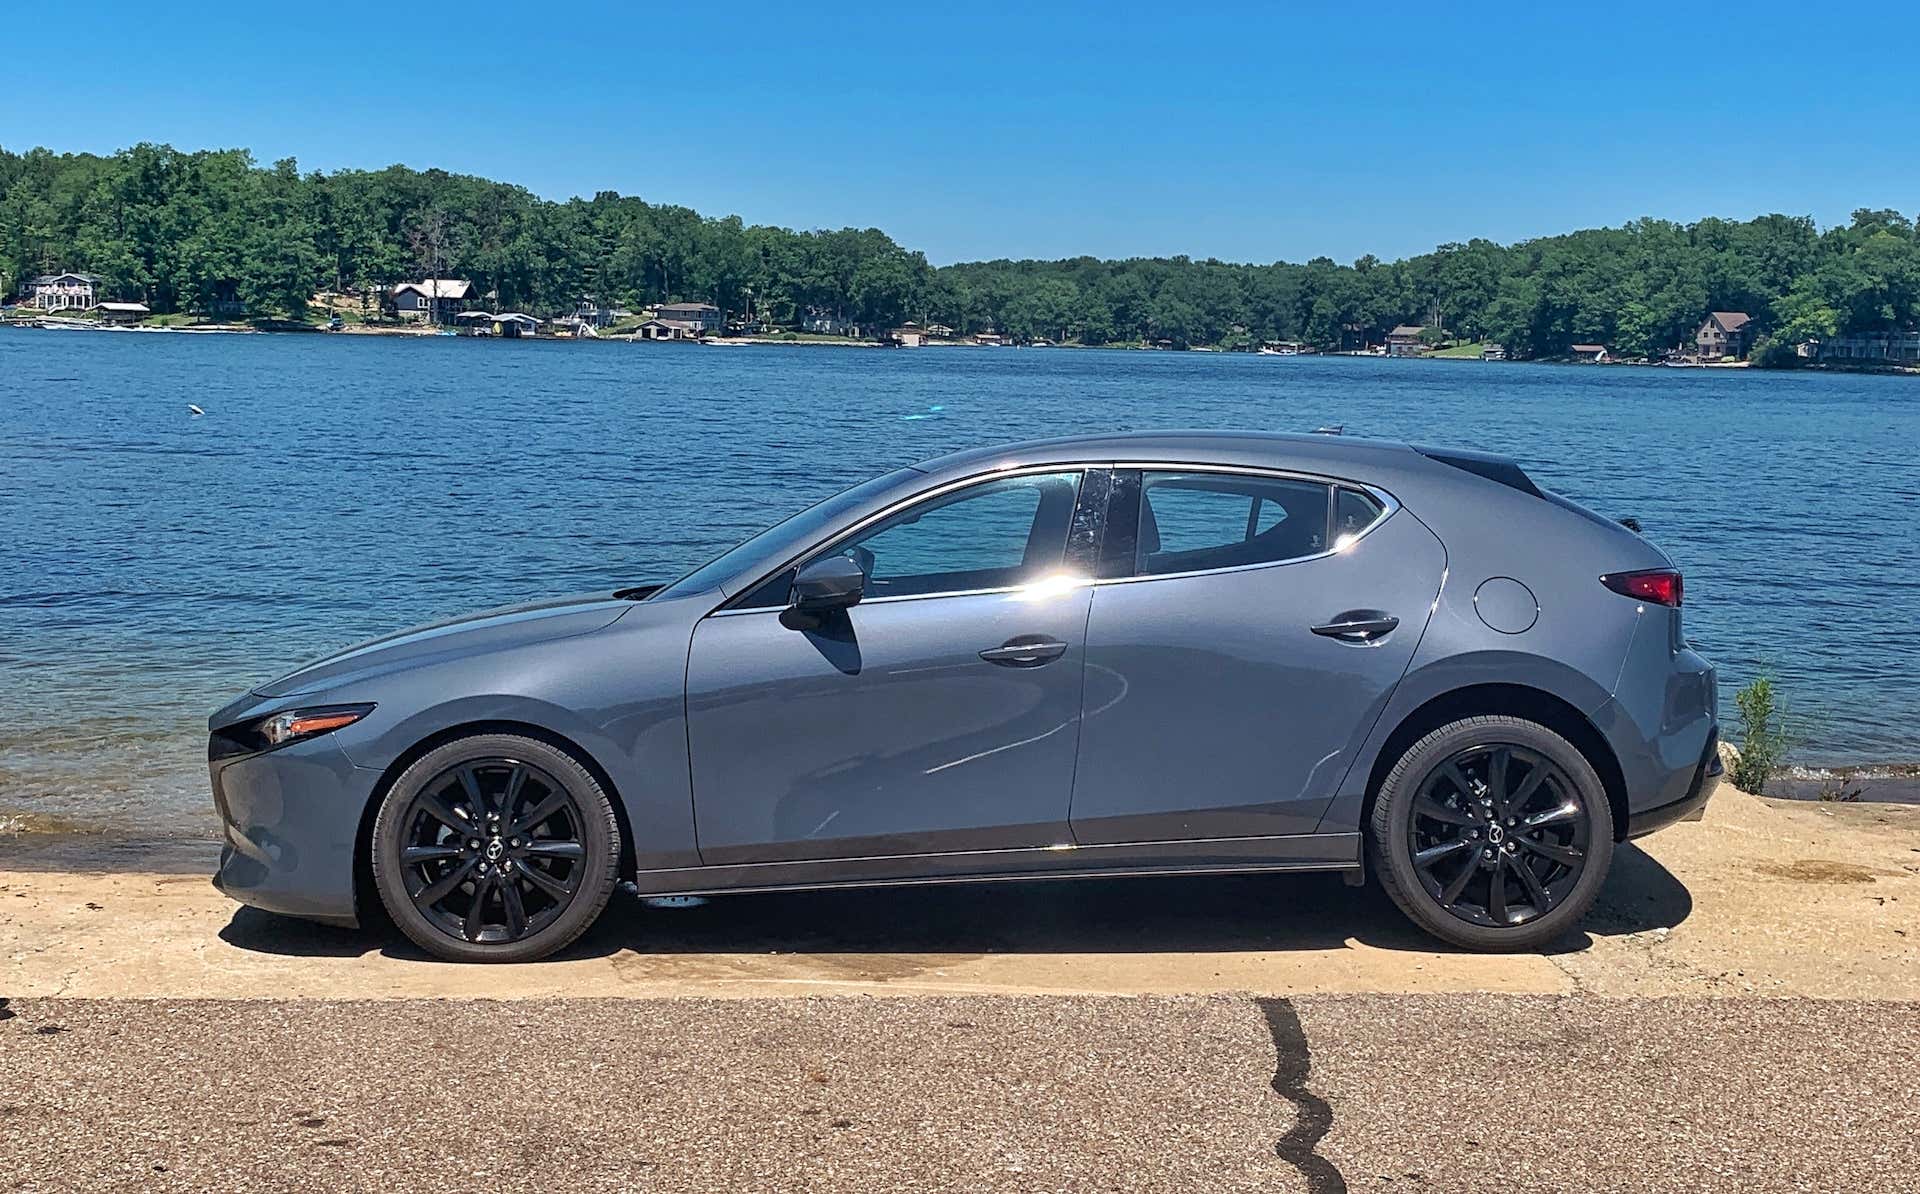 2020 Mazda3 Hatchback Review: Quite Possibly All The Car You'll Ever ...